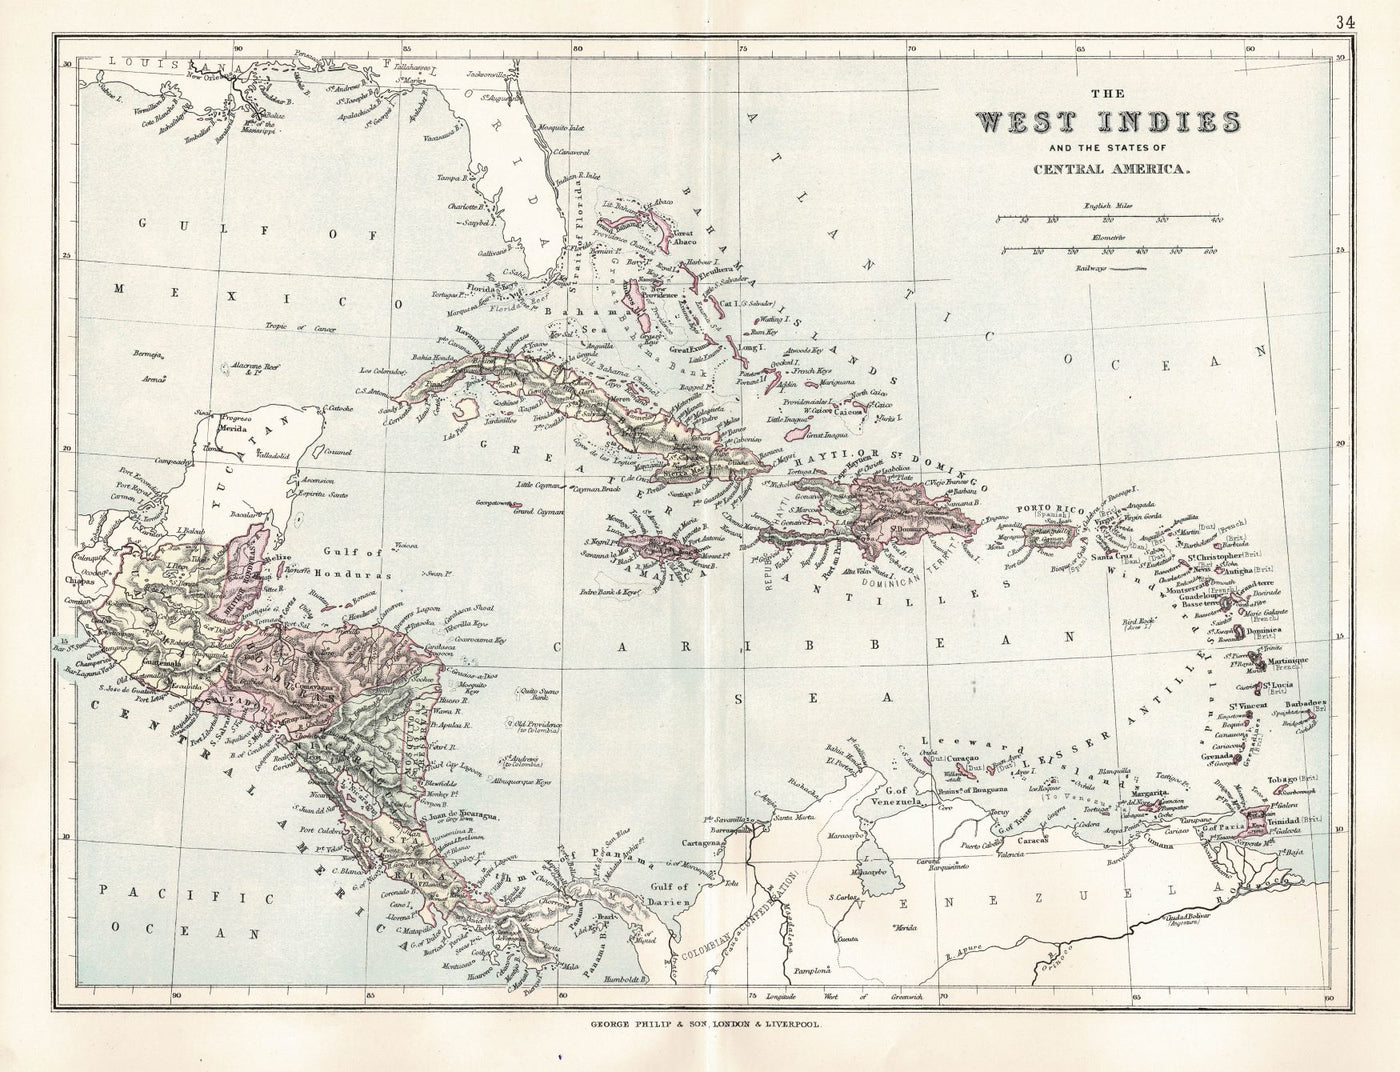 West Indies and Central America antique map 1891